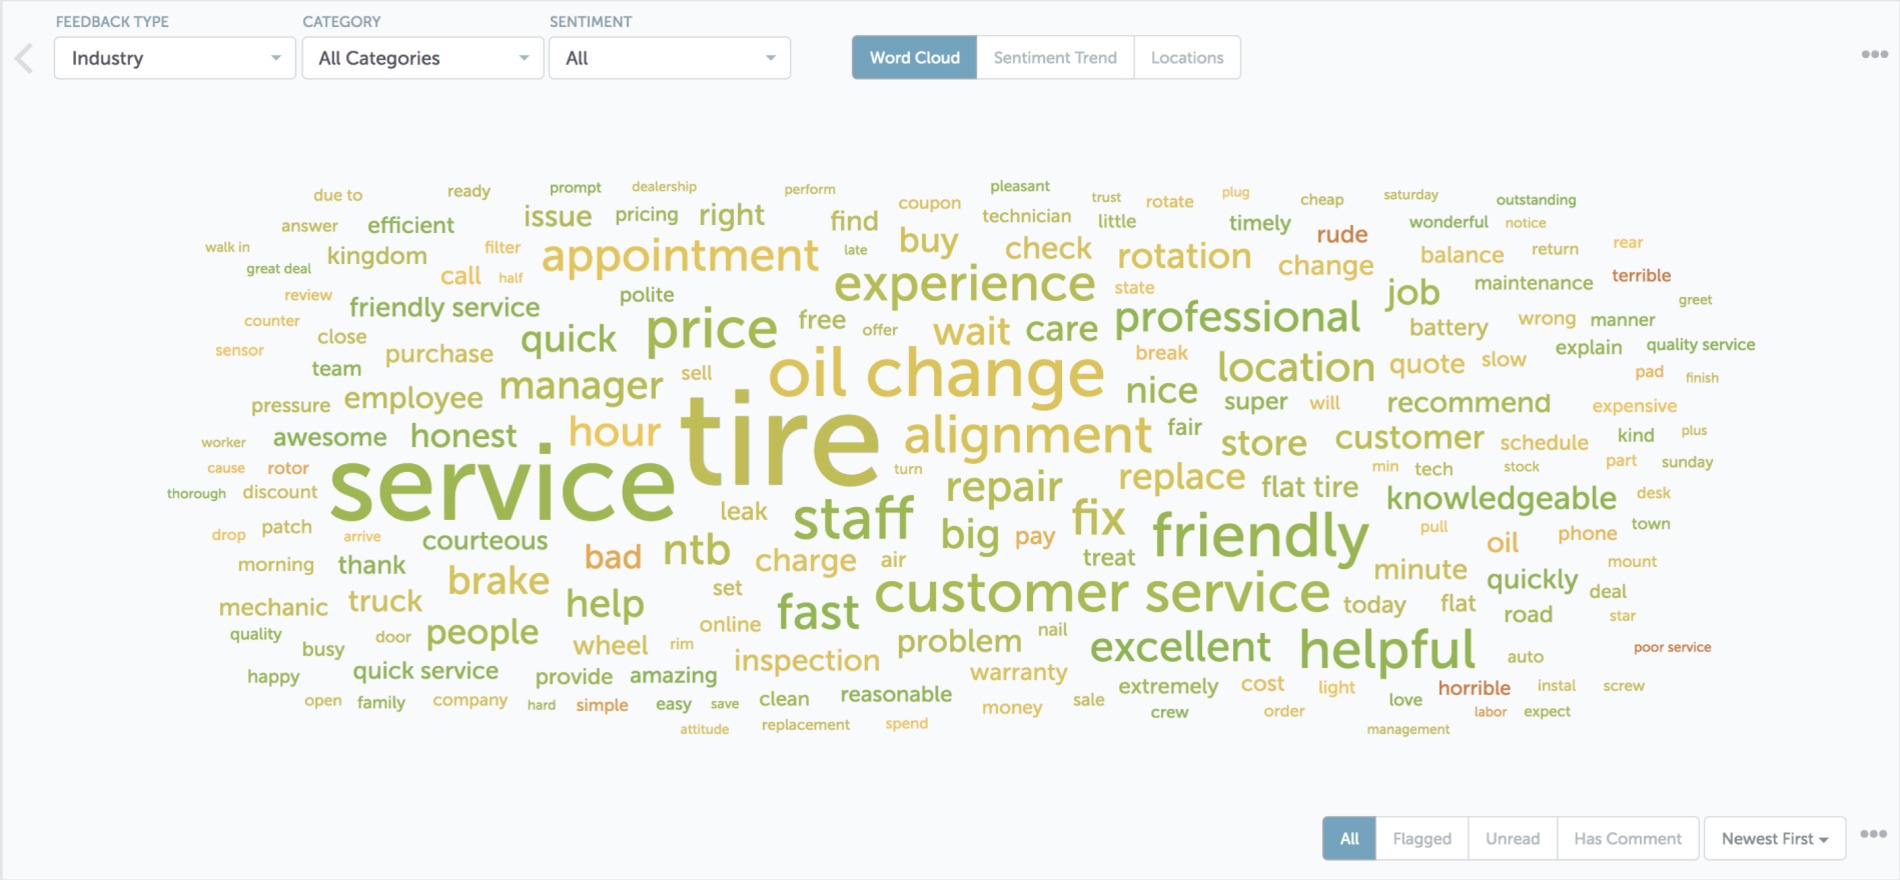 Word cloud highlighting service, tire, staff, and friendly.